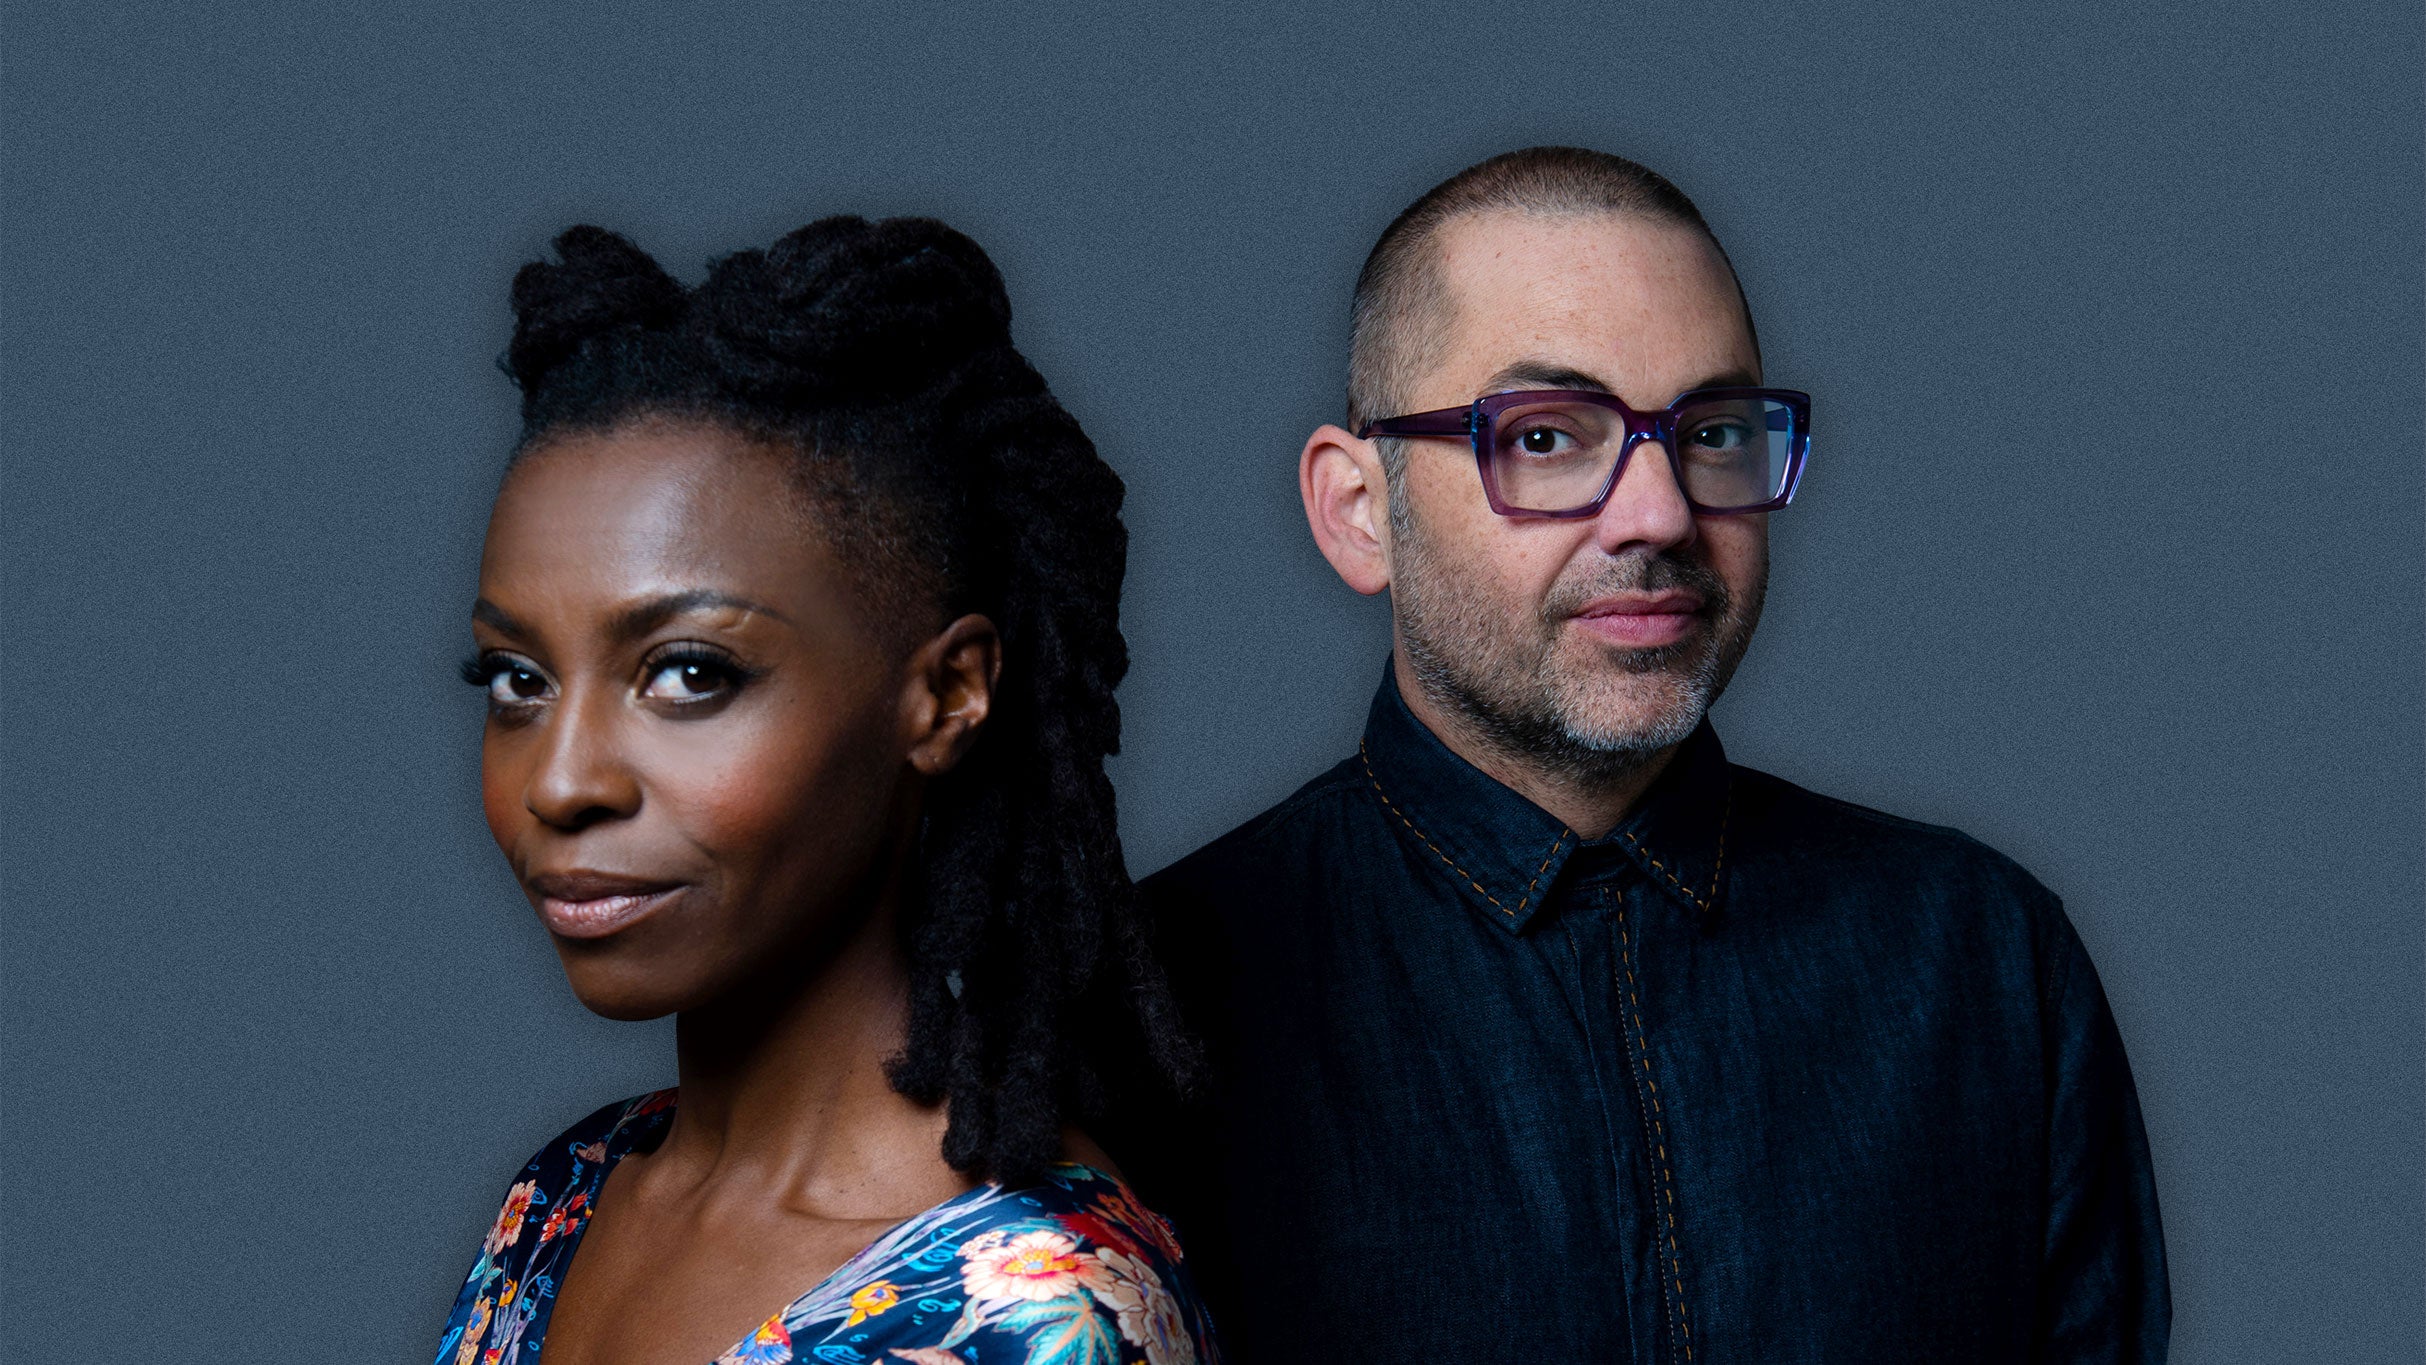 Image used with permission from Ticketmaster | Morcheeba Australian Tour tickets